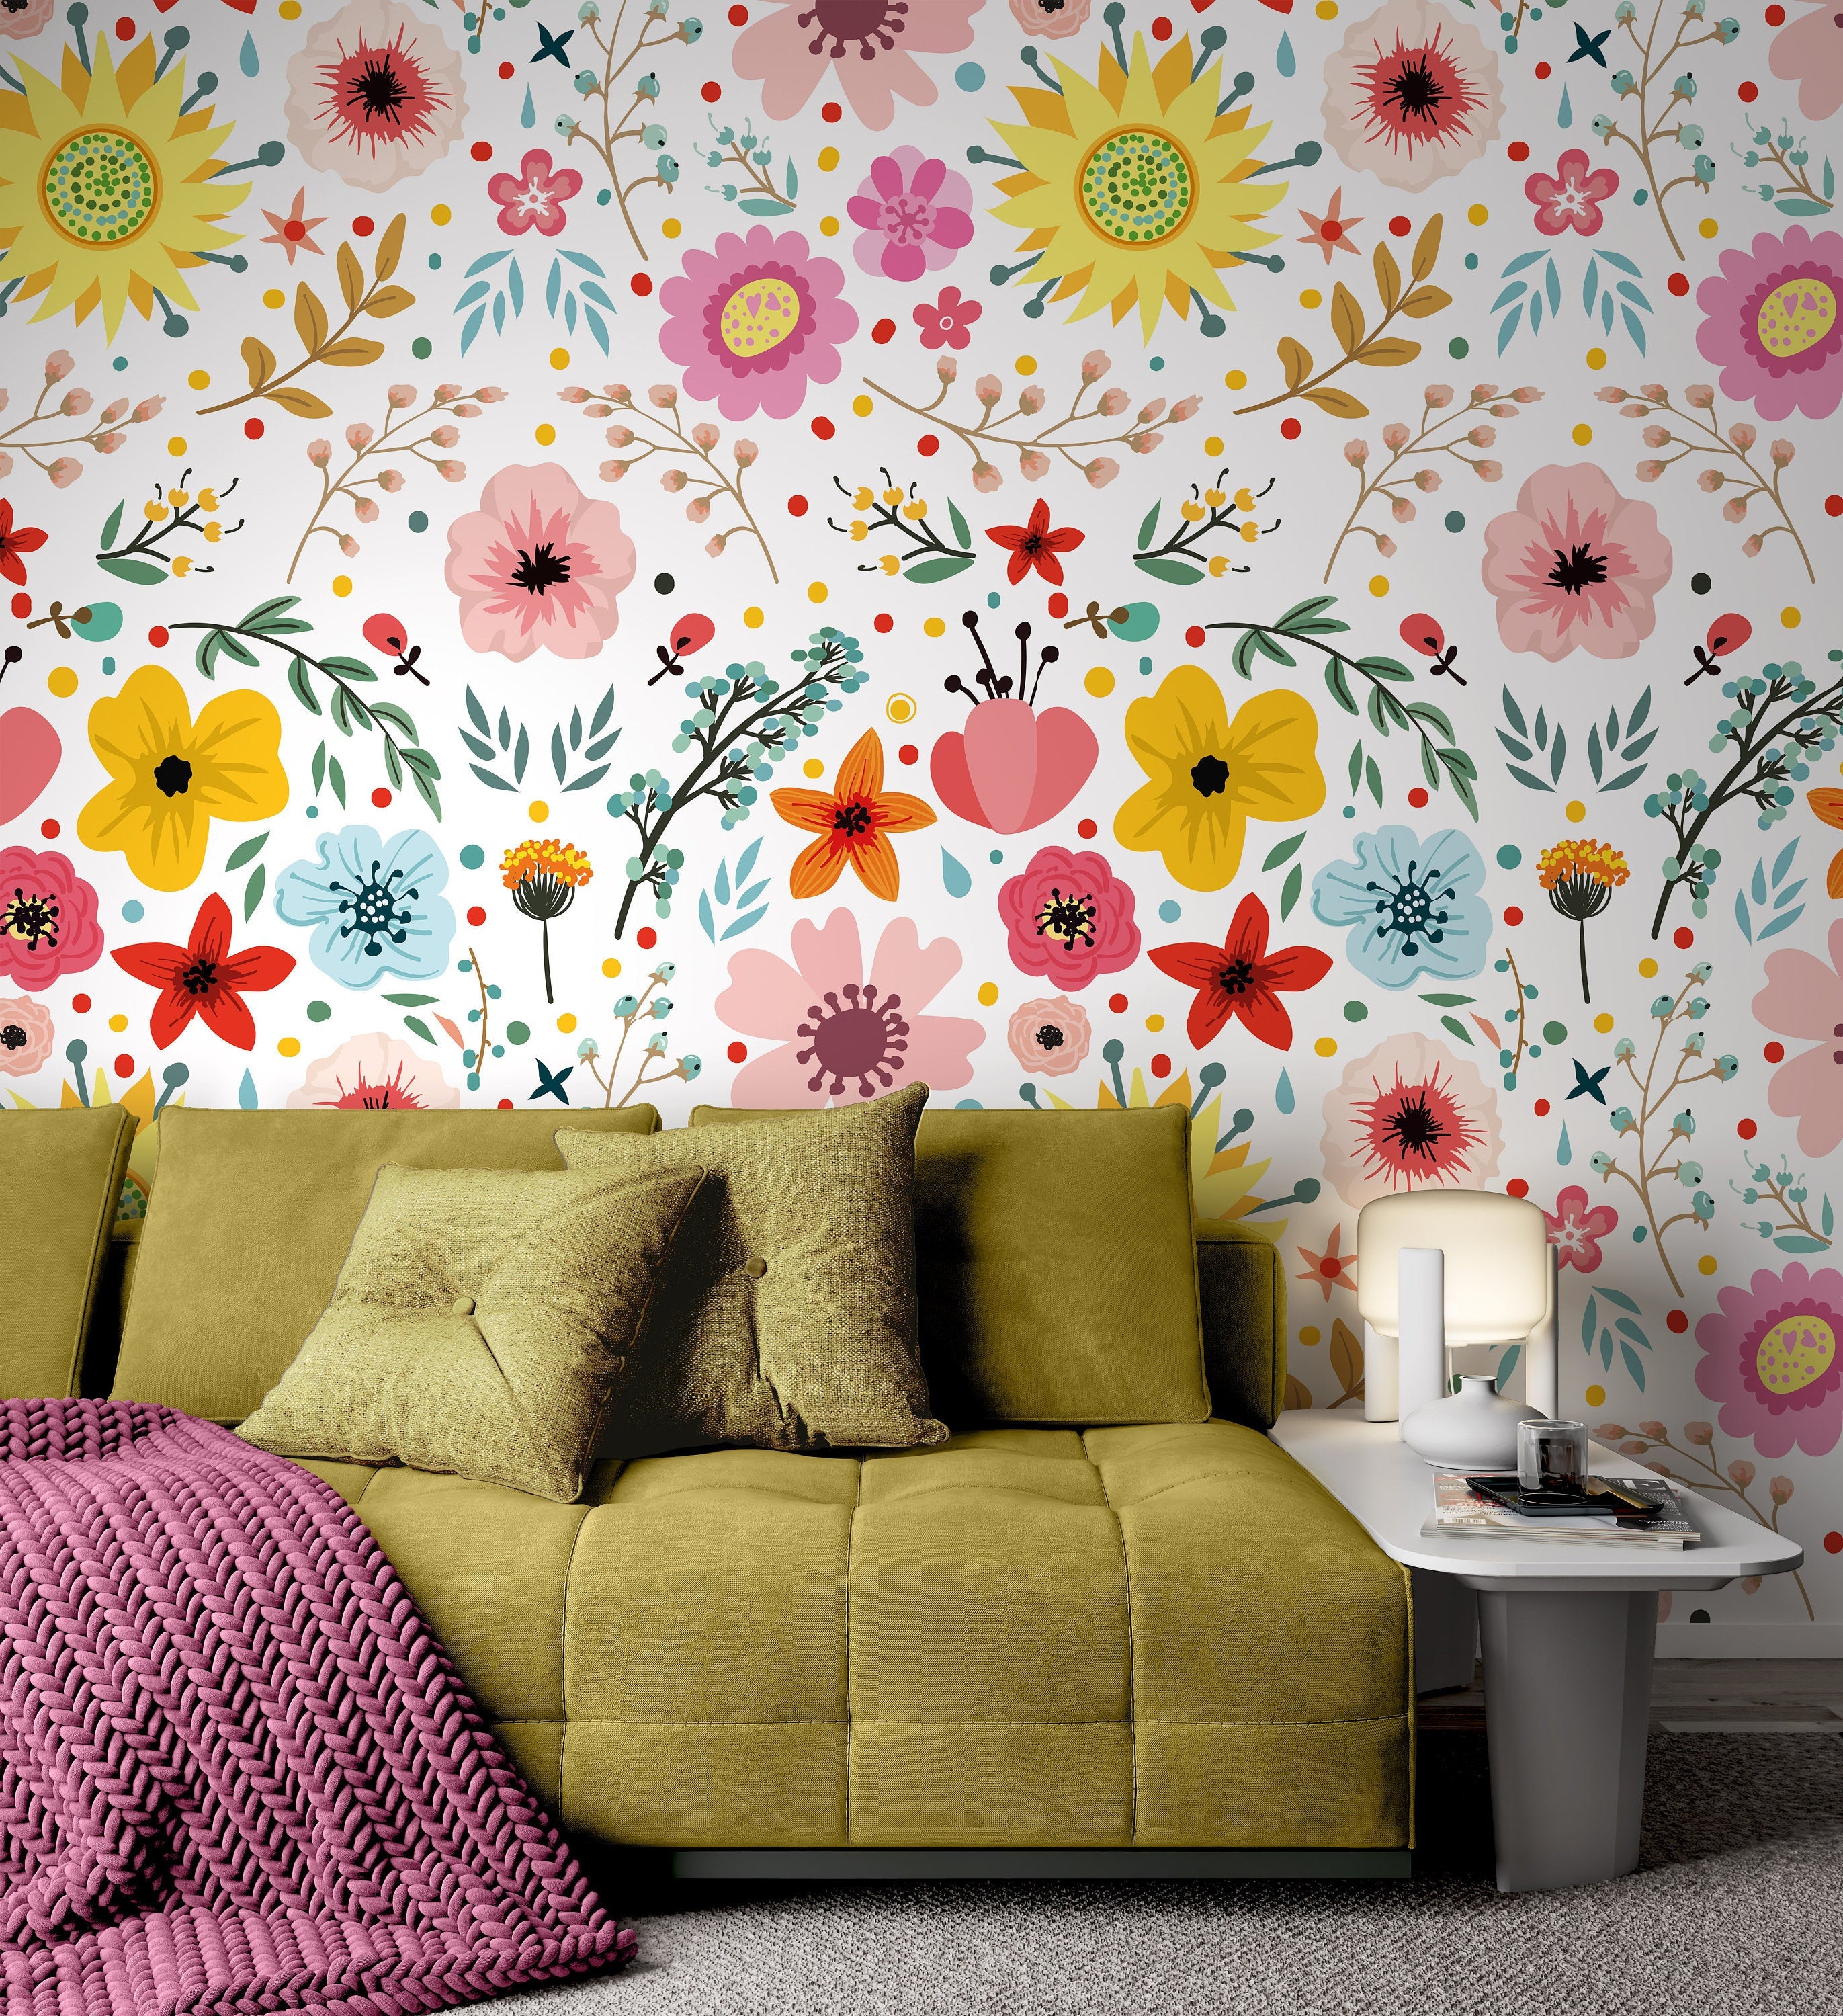 Abstract Colorful Flowers Herbs Pattern Design Floral Background Wallpaper Wall Art